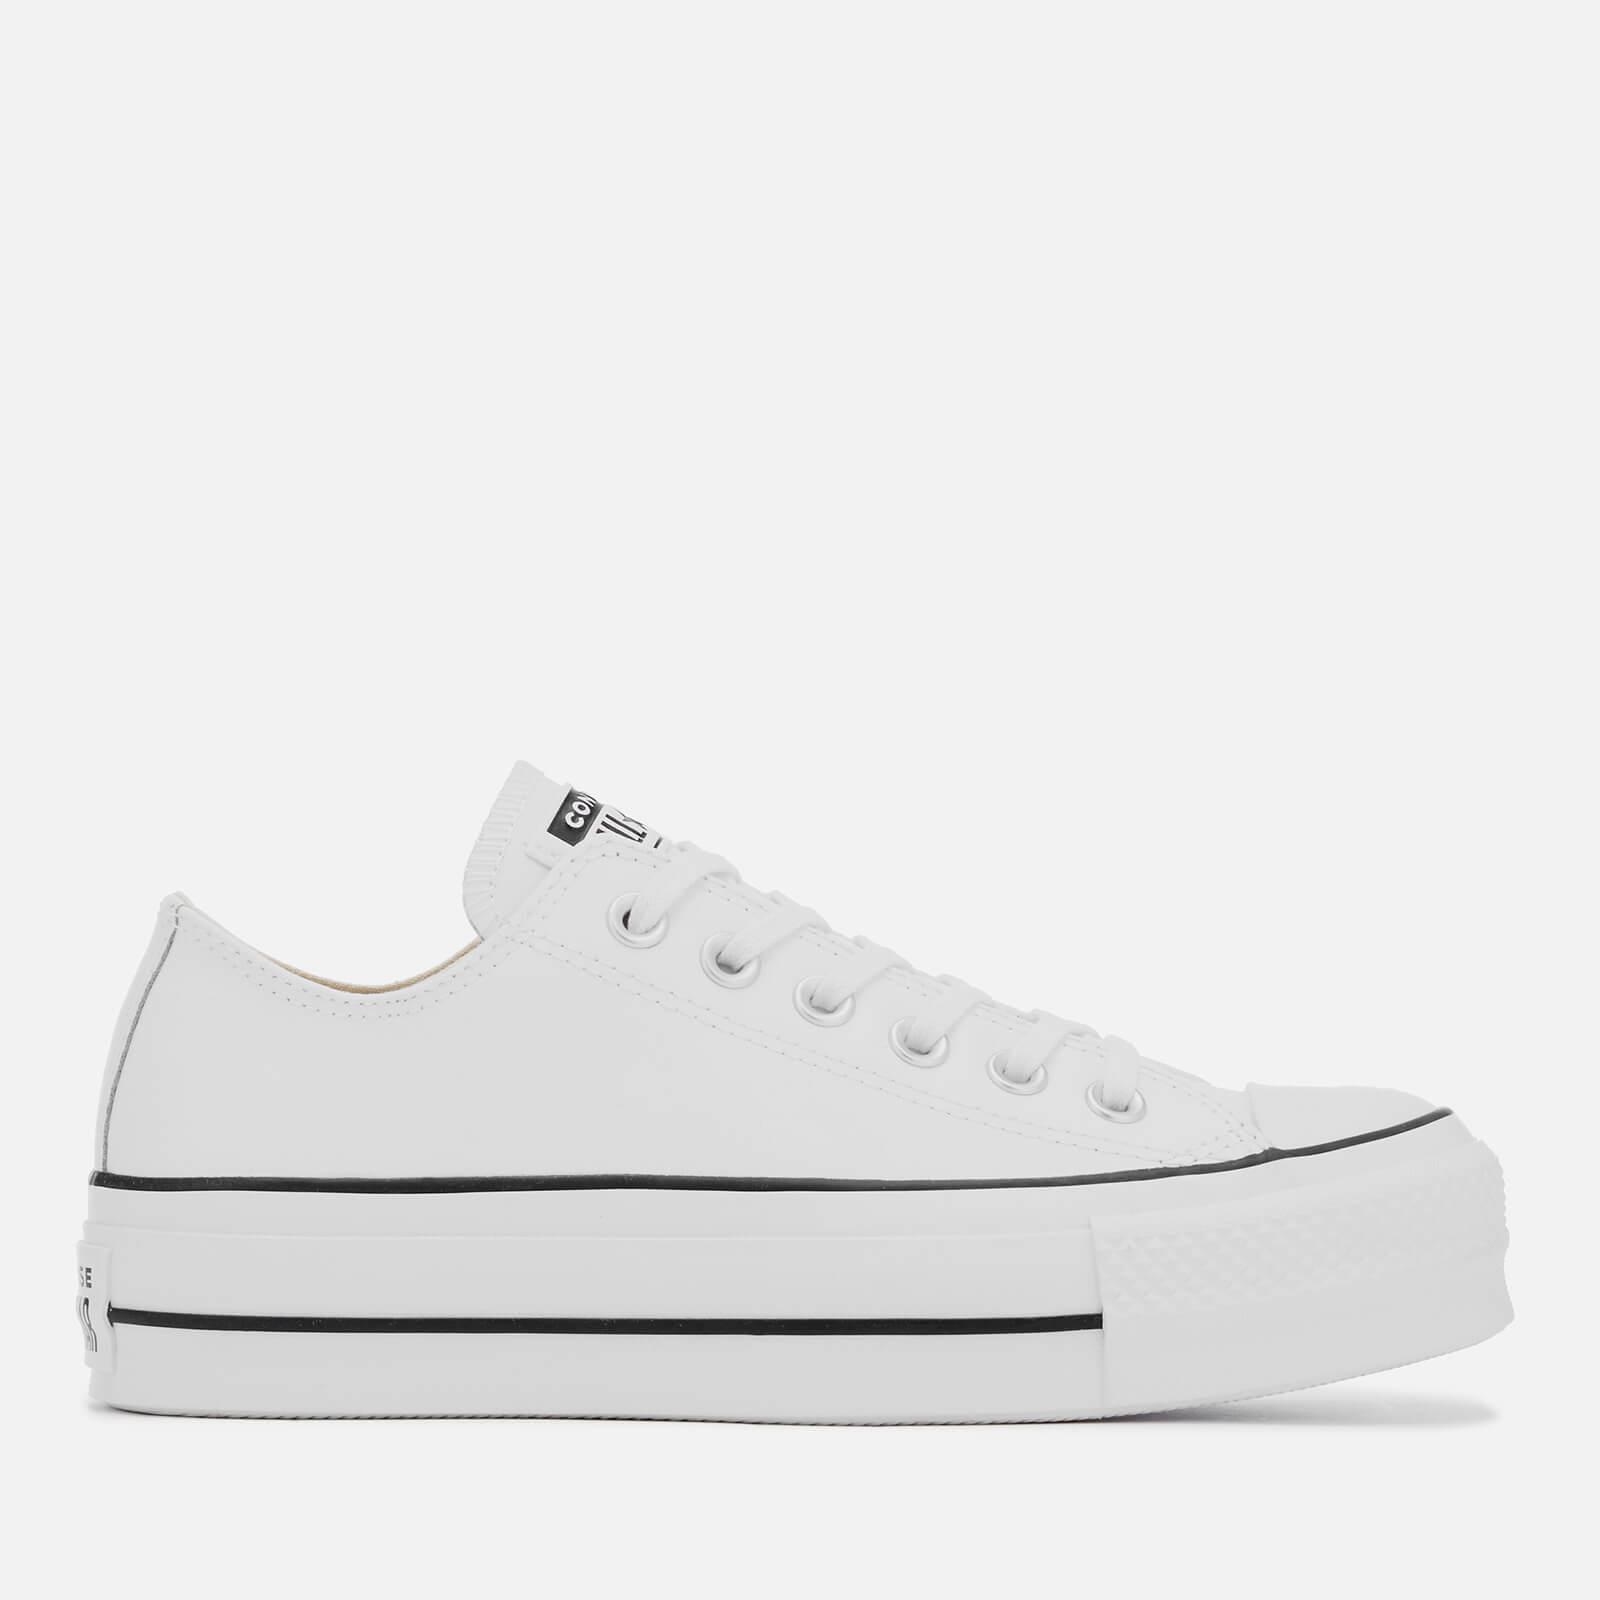 Converse Chuck Taylor All Star Lift Clean Ox Trainers in White - Lyst